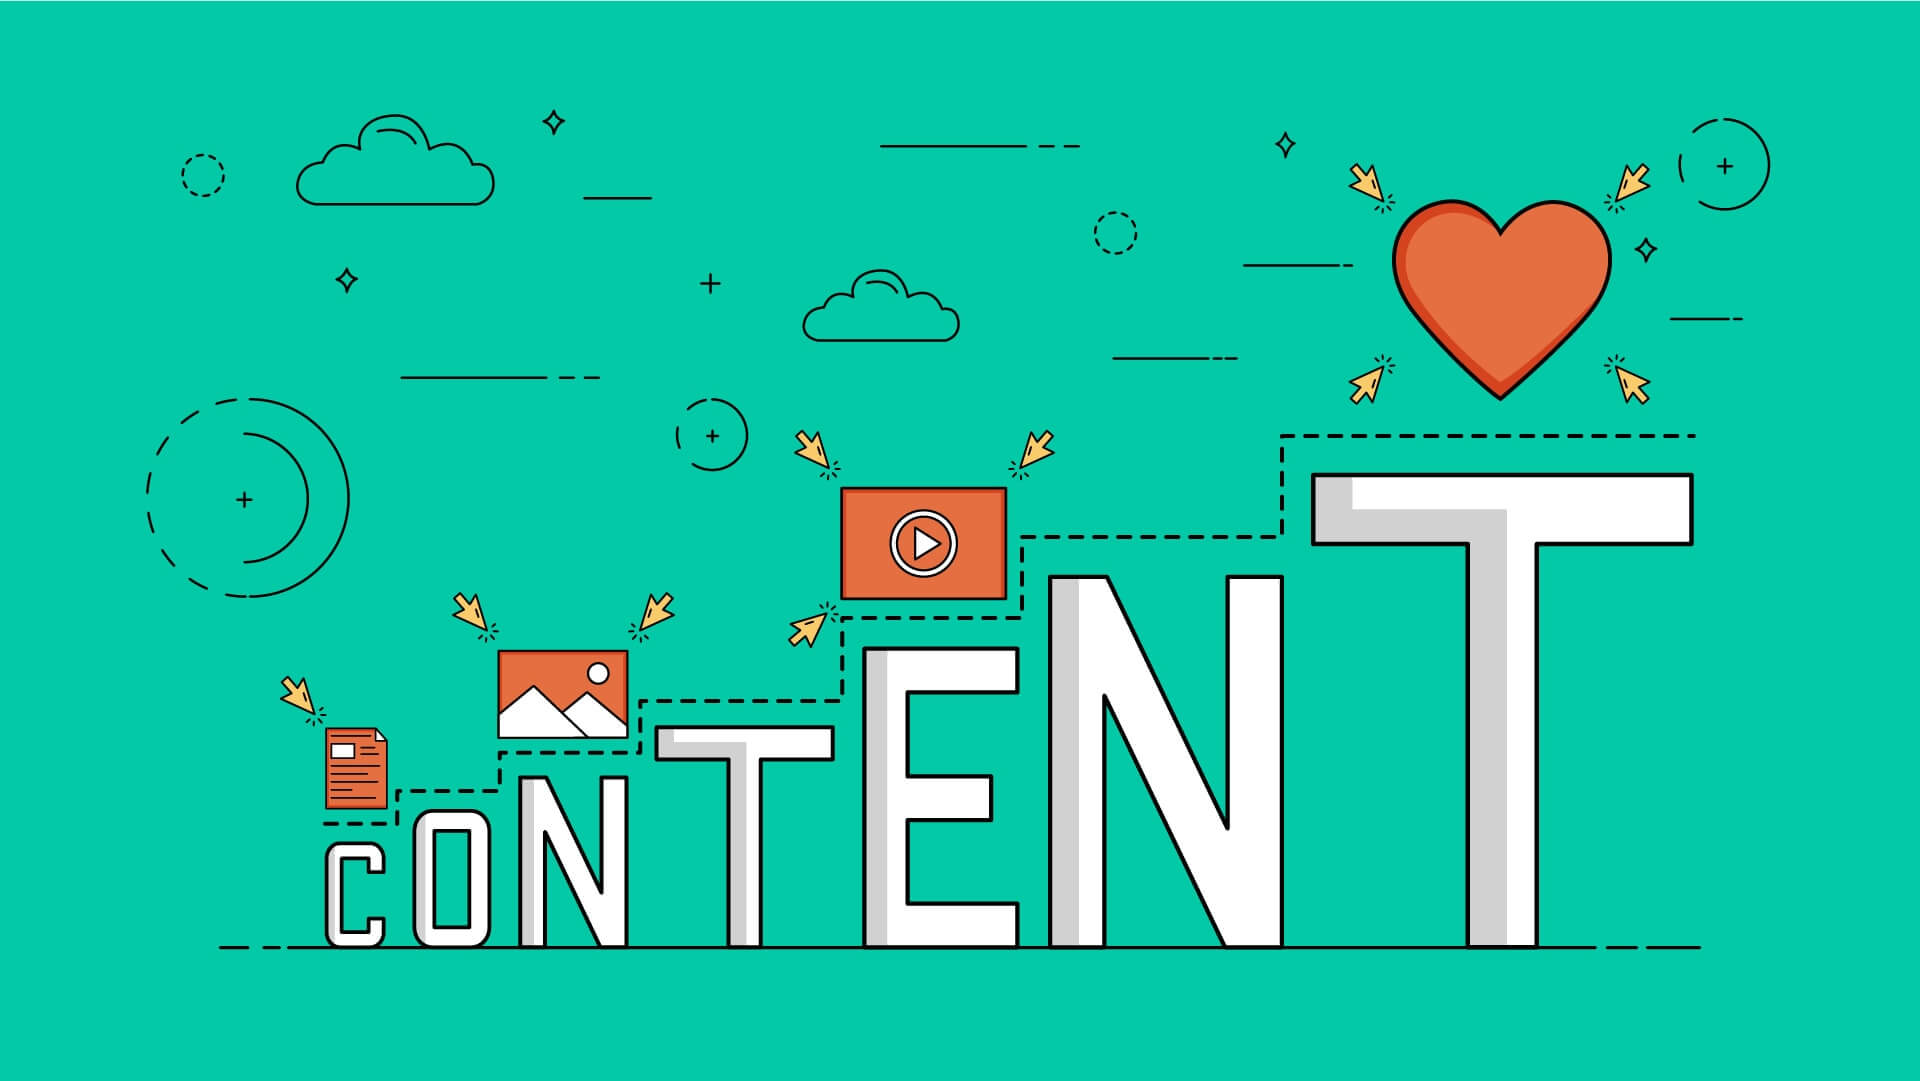 “Content is King” trong suy nghĩ của giới Digital Marketing